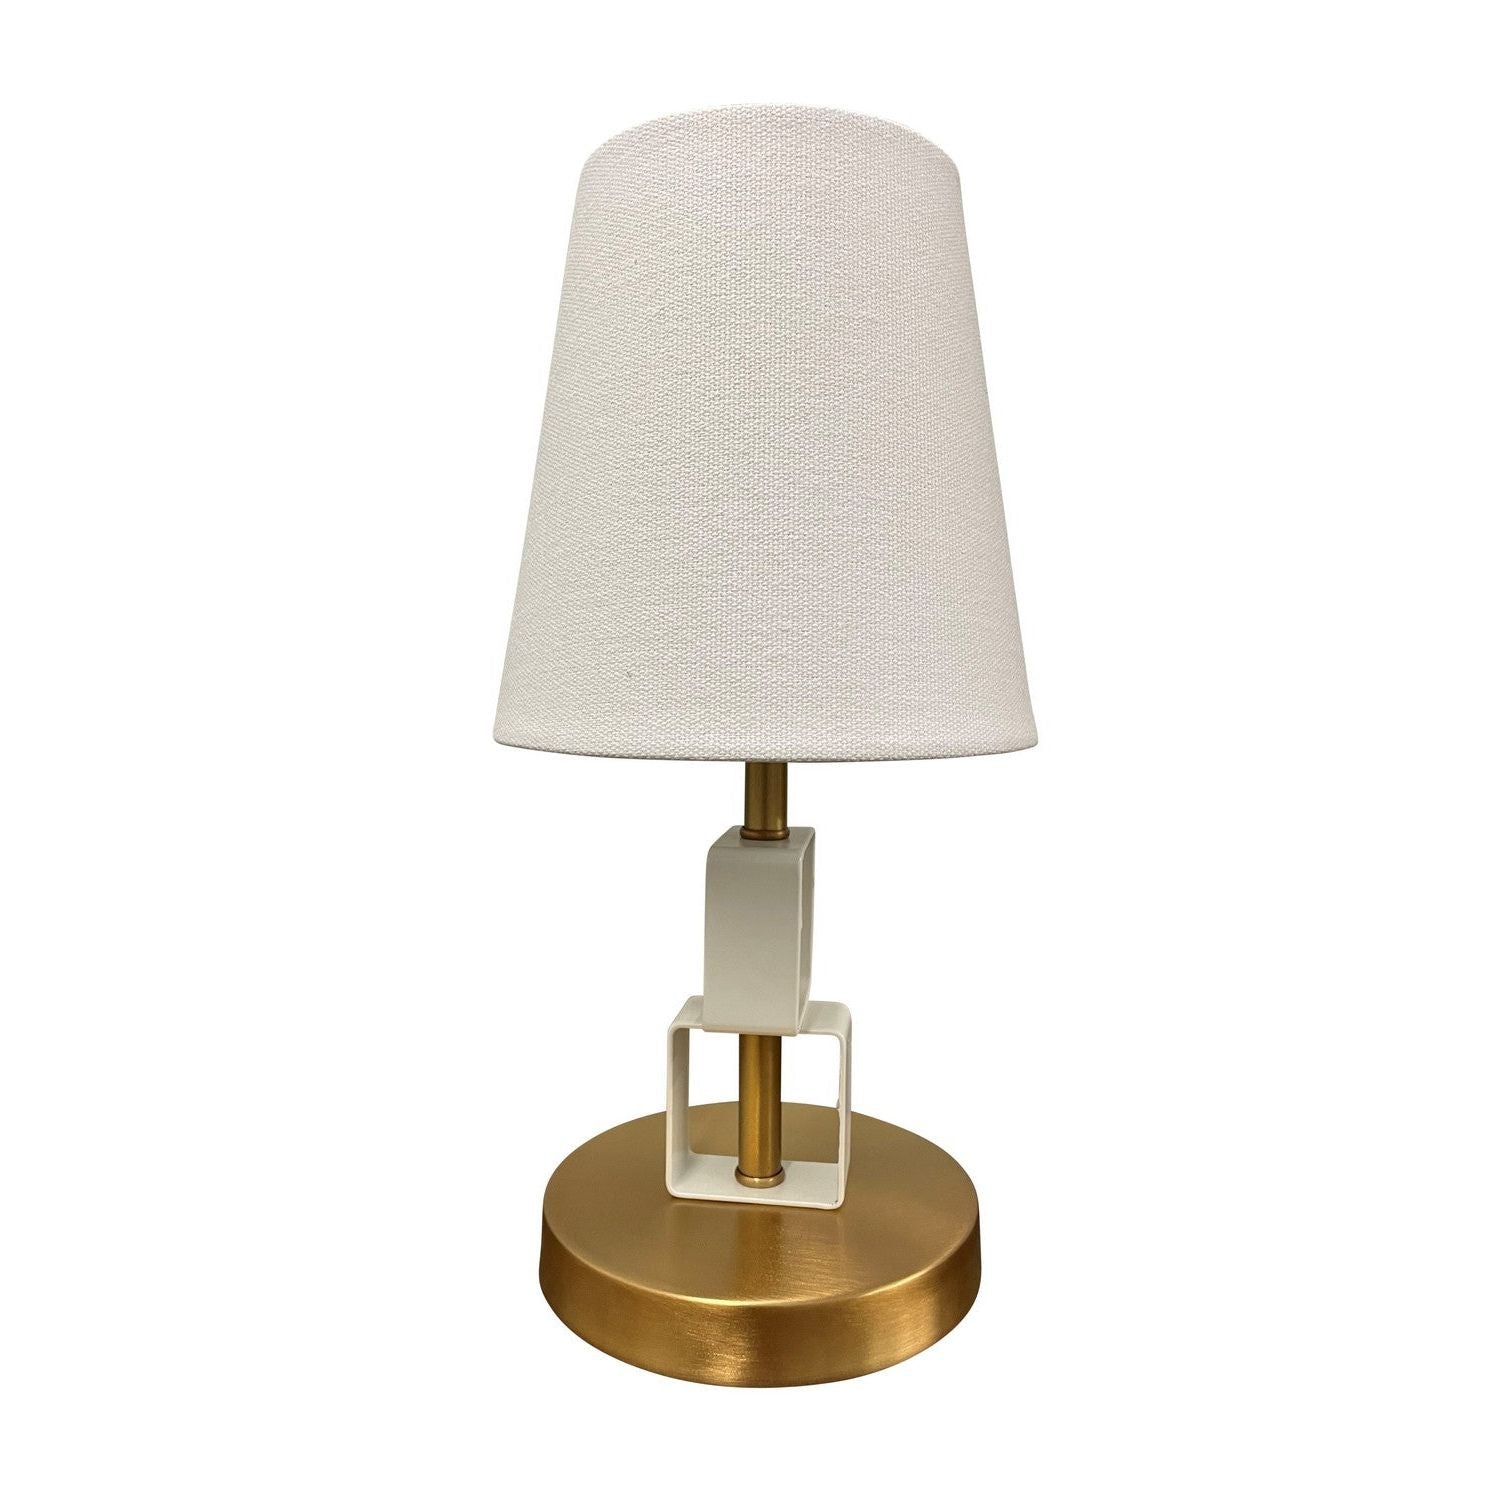 House of Troy - B208-WB/WT - One Light Accent Lamp - Bryson - Weathered Brass/White